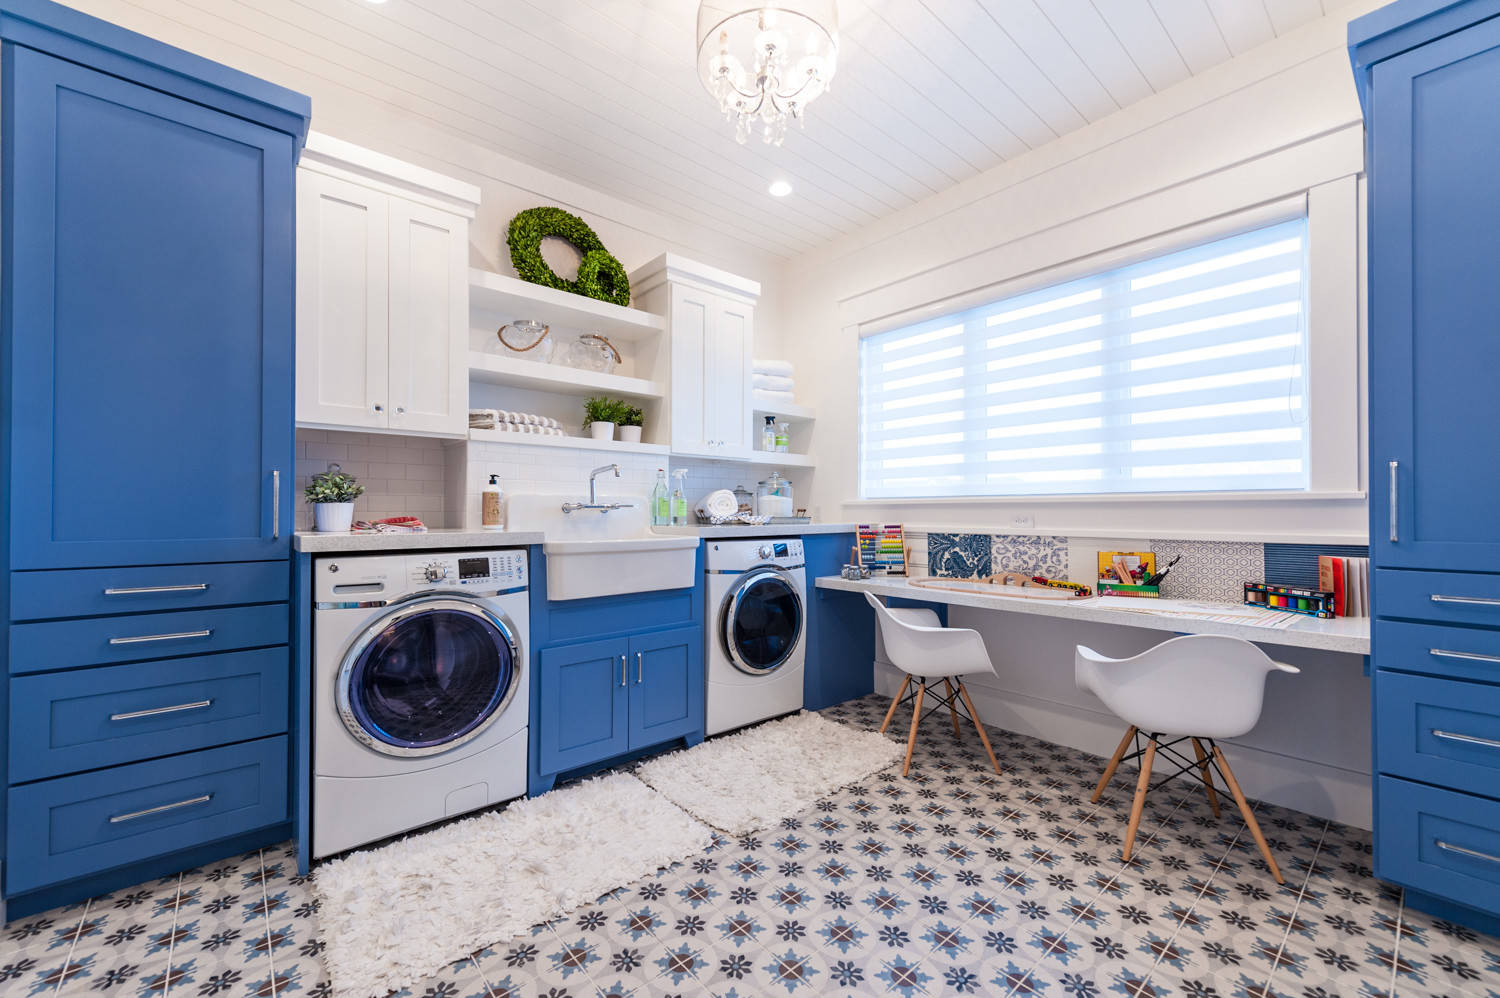 Laundry Room with Blue Walls - Transitional - Laundry Room